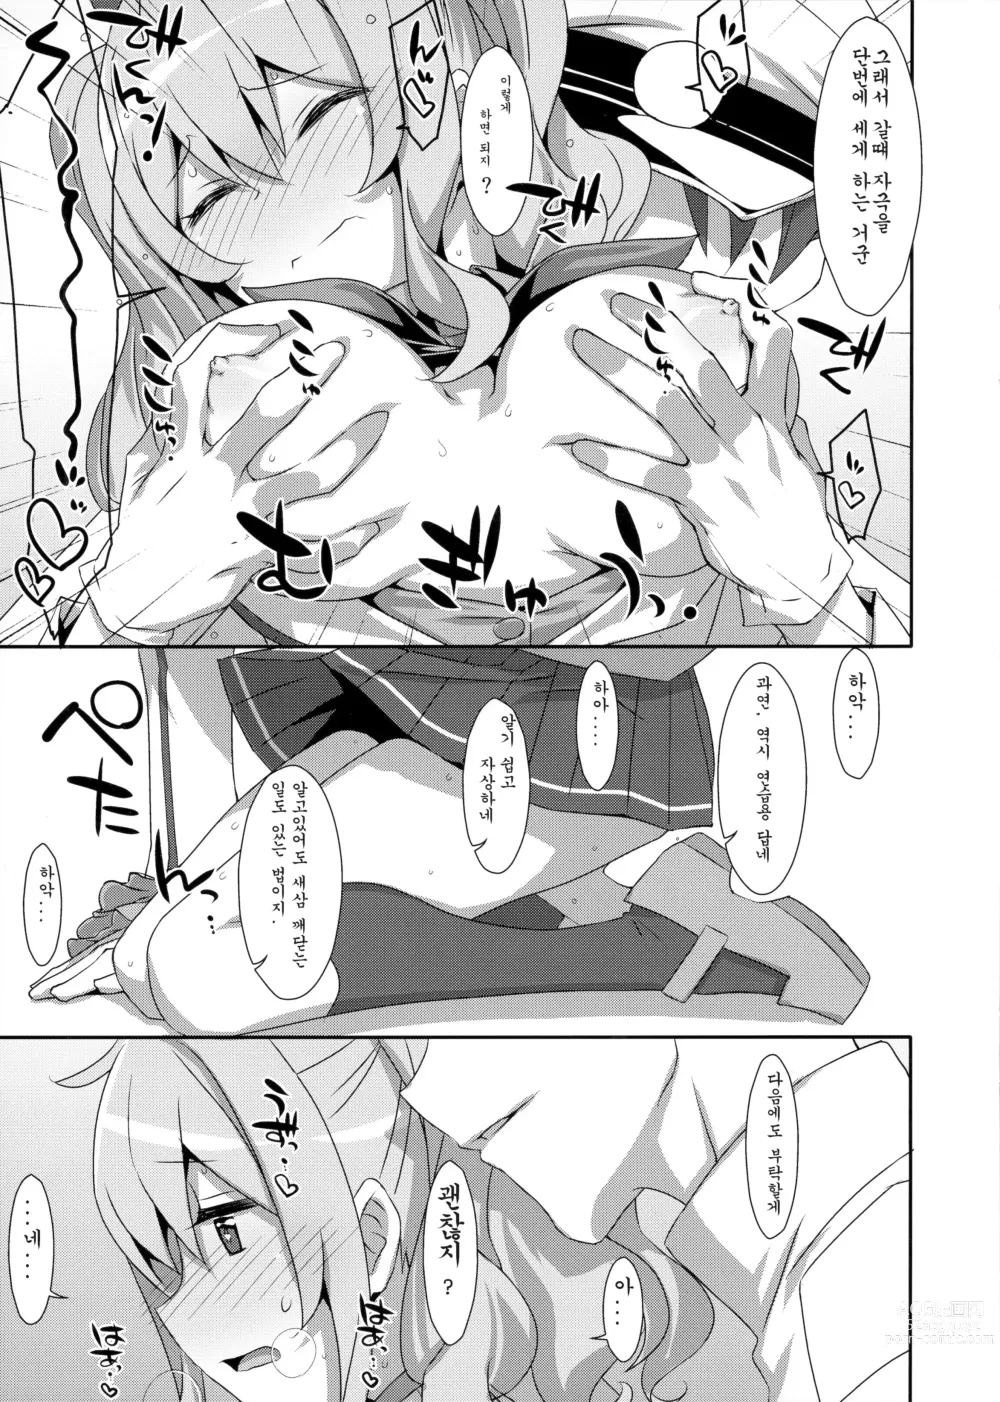 Page 4 of doujinshi INSTANT TIES